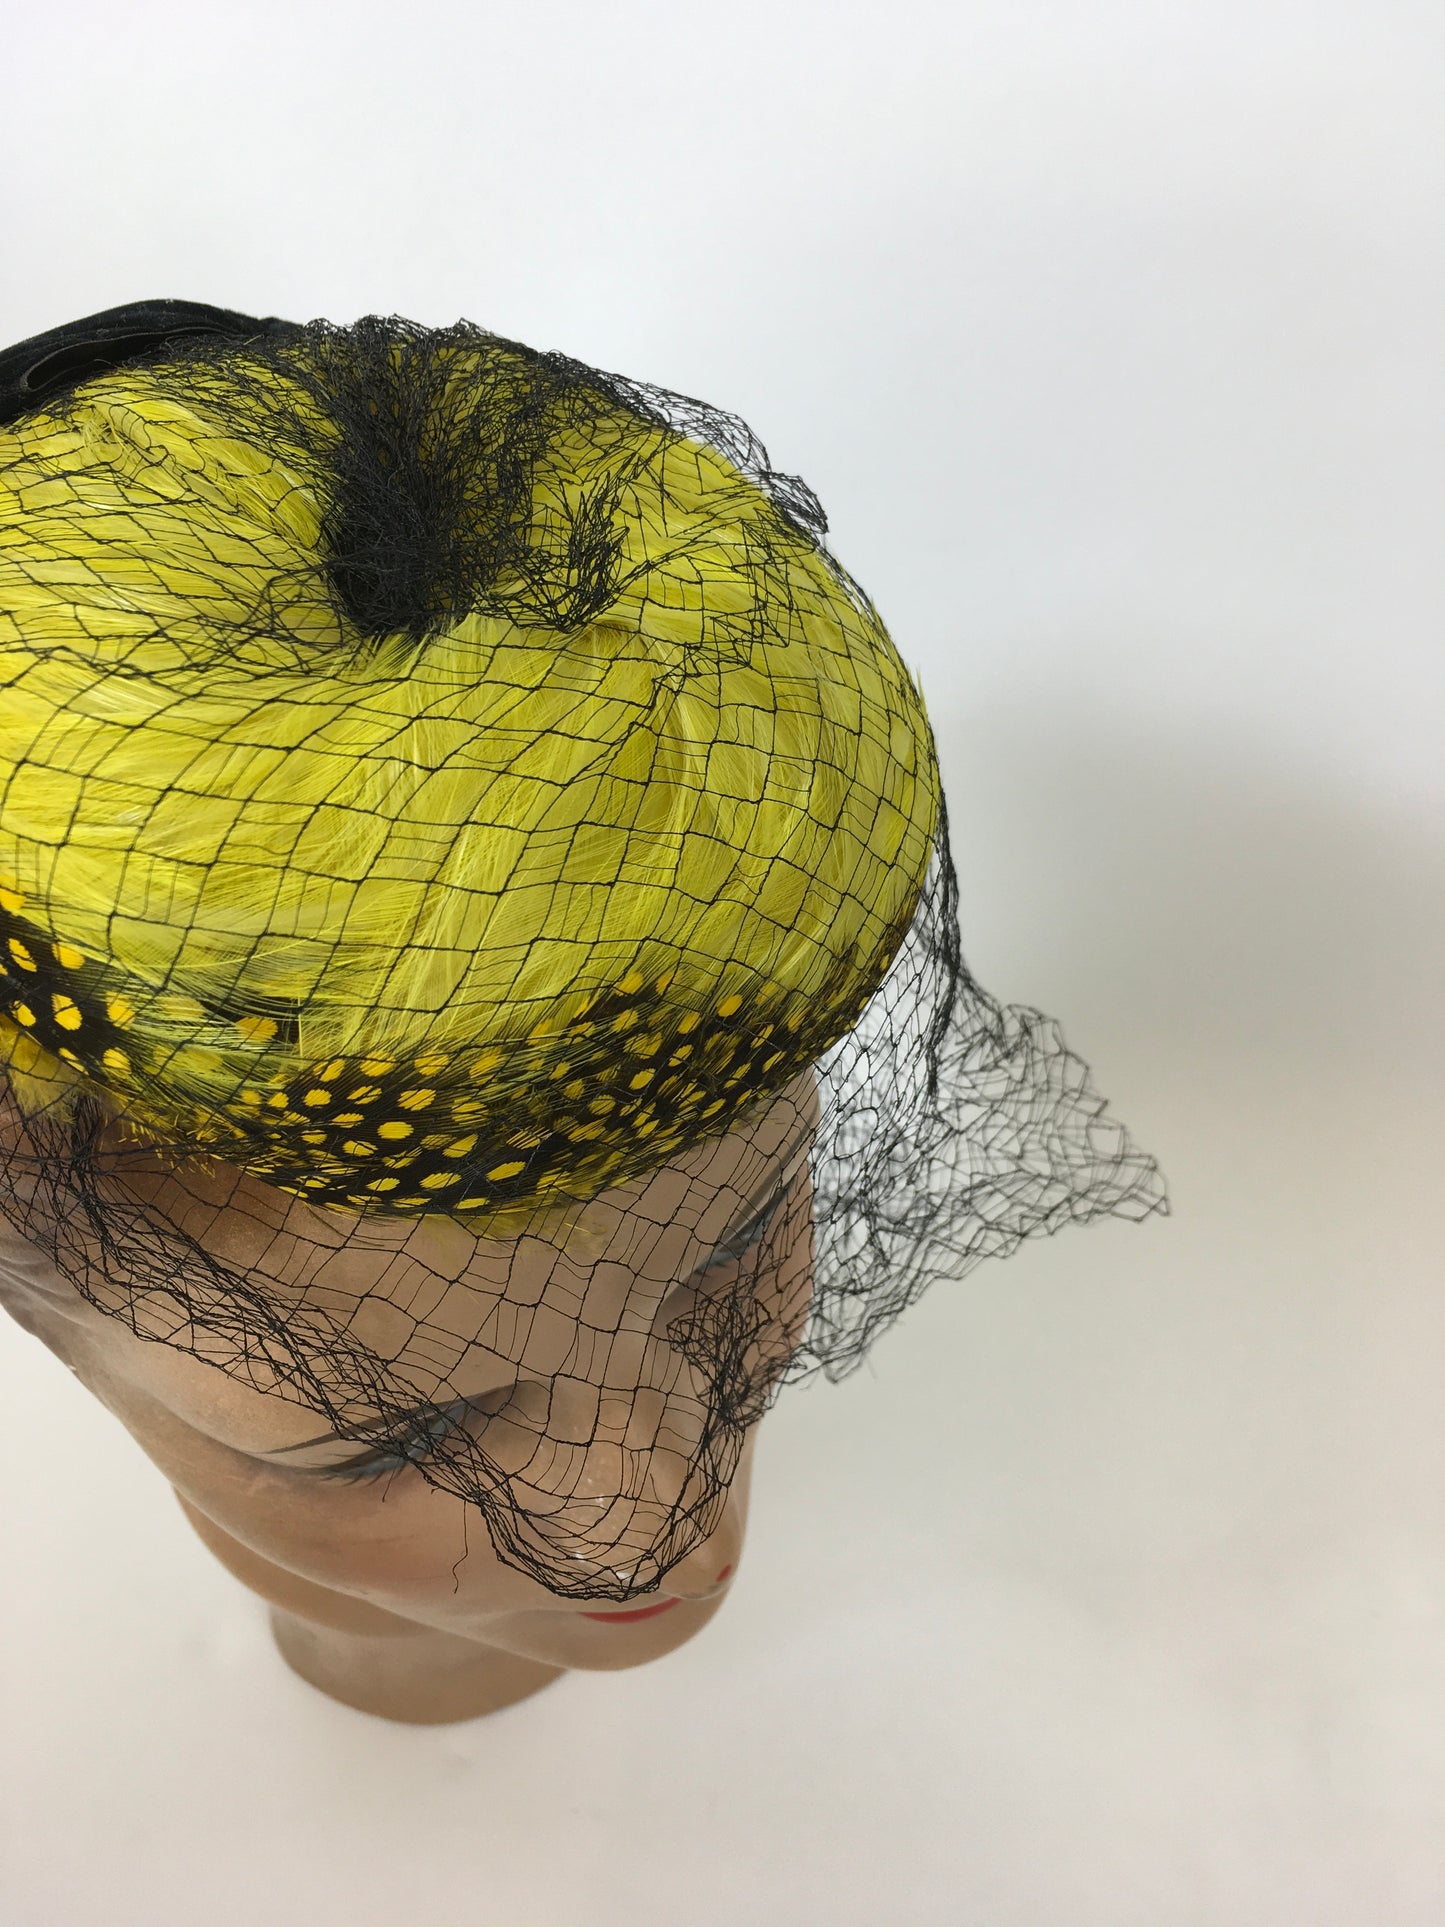 Original 1940’s Fabulous Bright Yellow & Black Feather Topper Hat - With Velvet Bow & Veiling